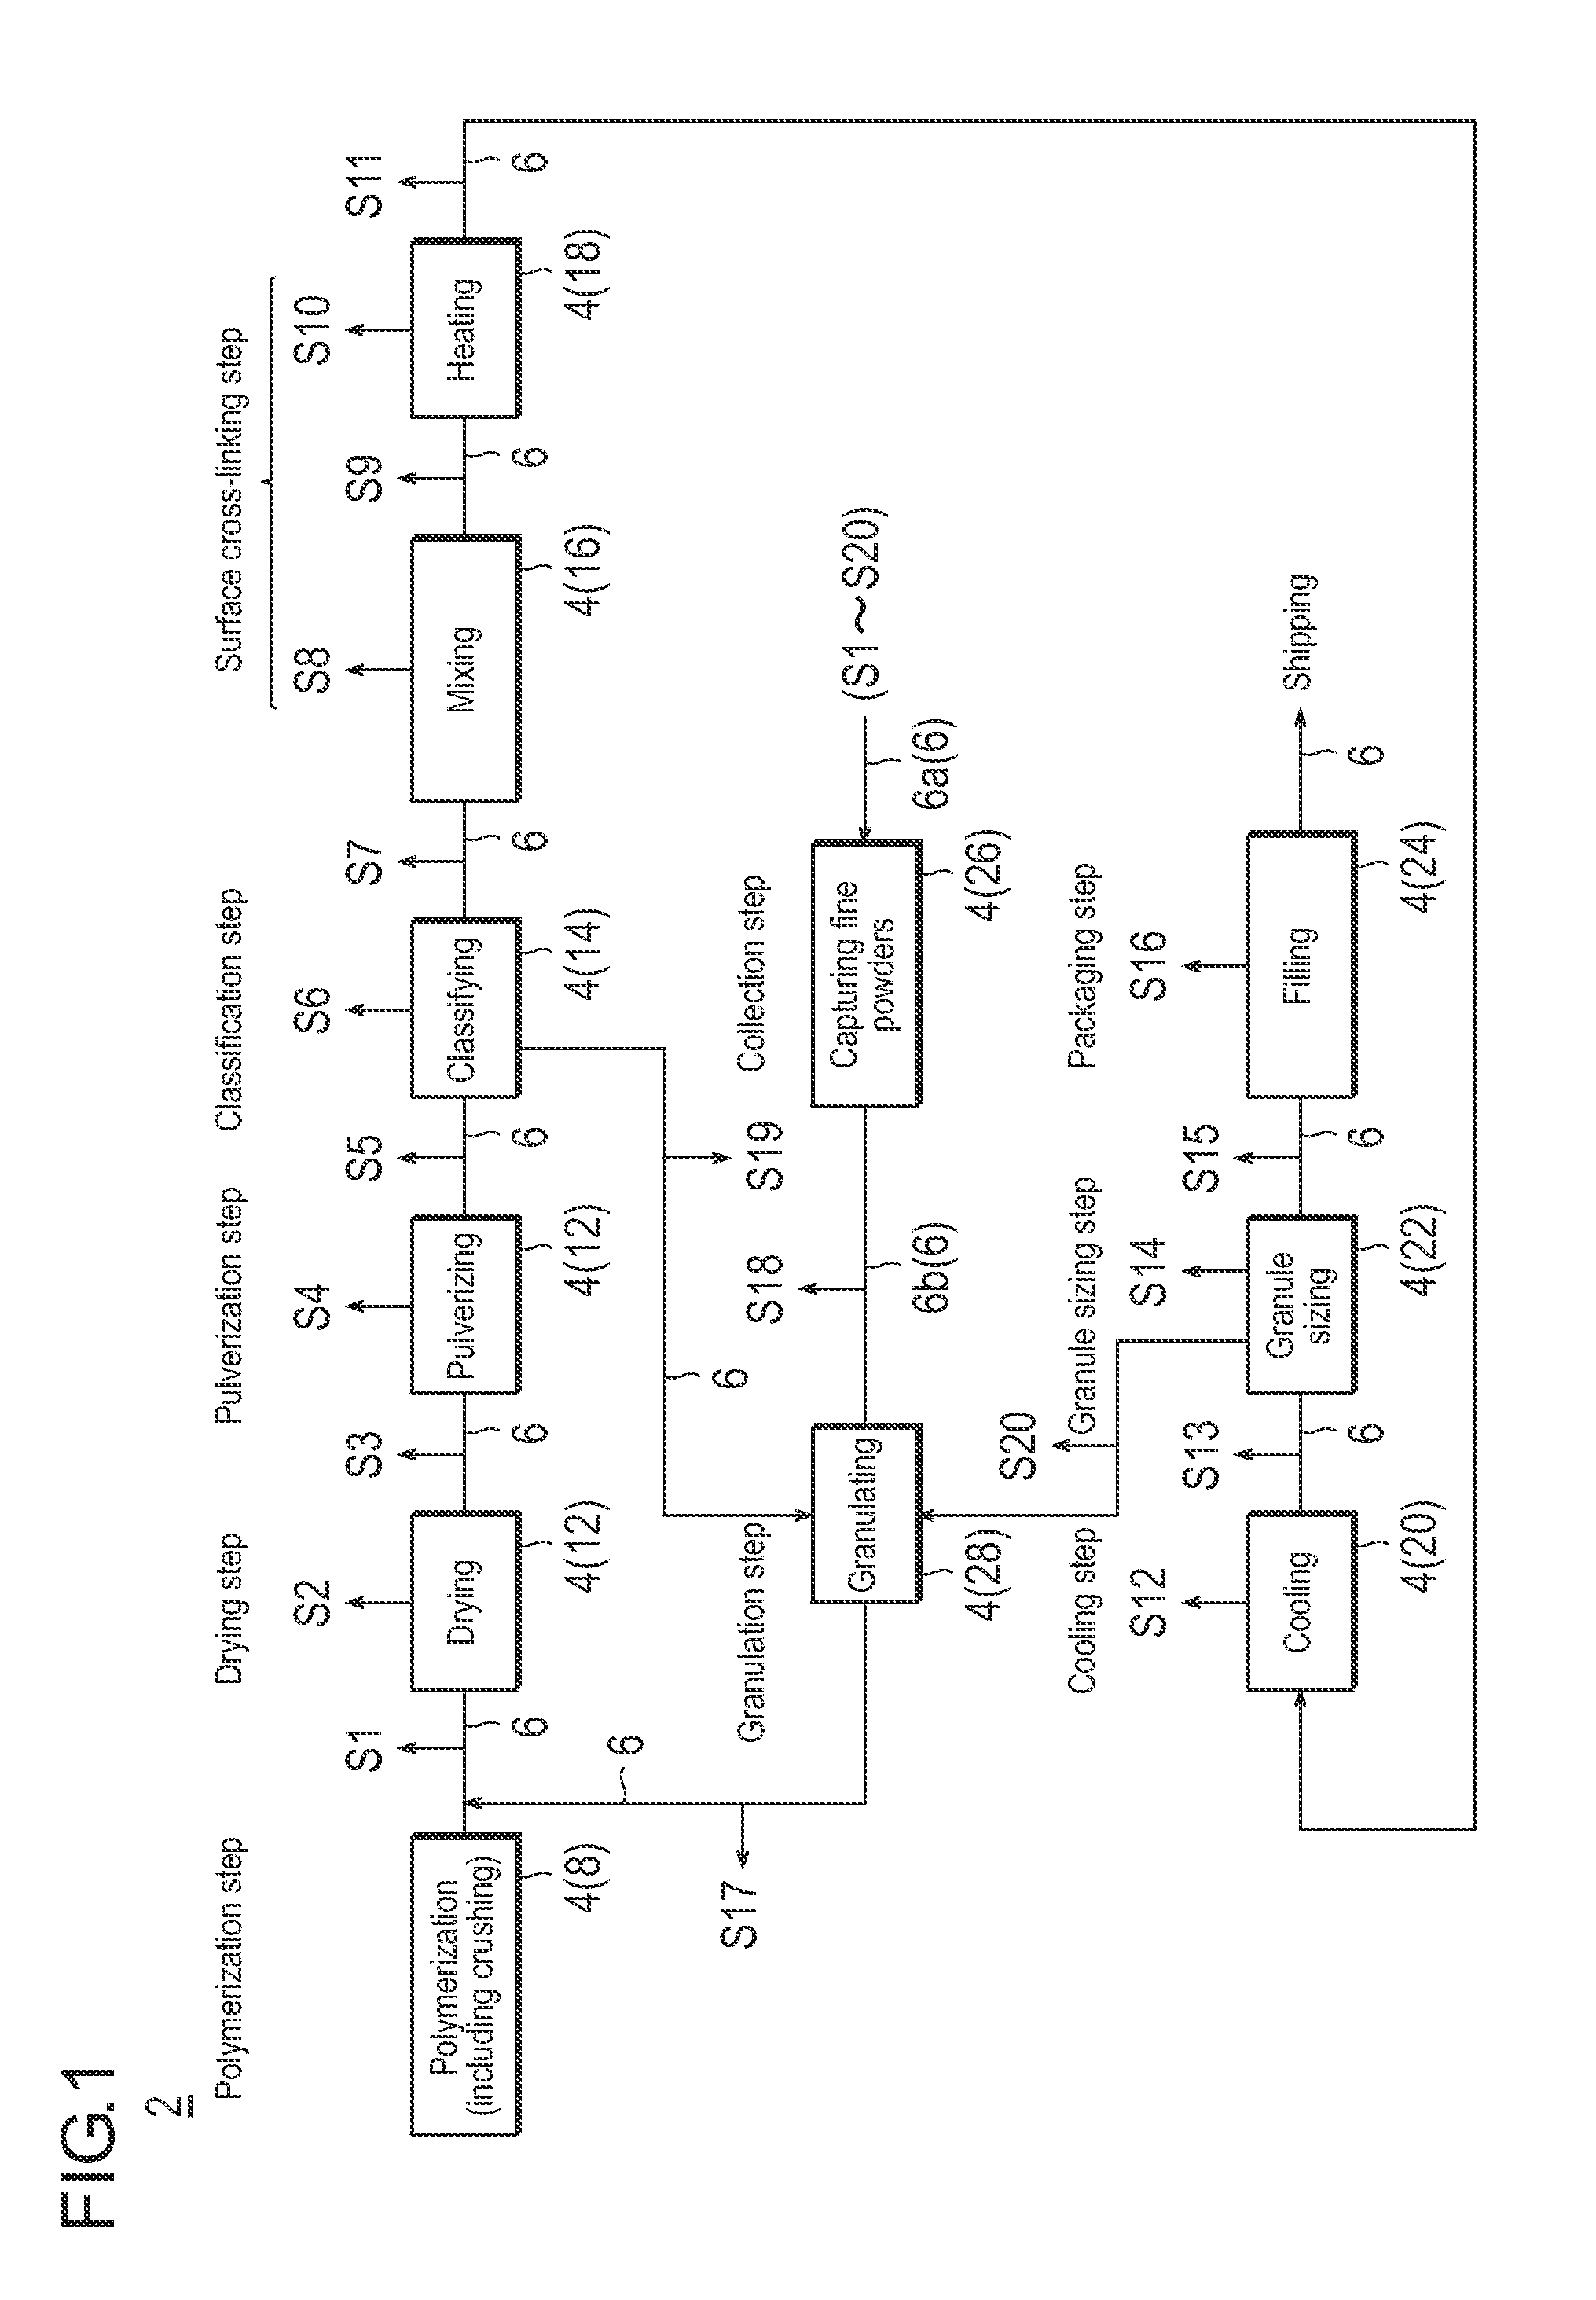 Method of manufacturing a particulate water-absorbing agent composed principally of a water-absorbing resin